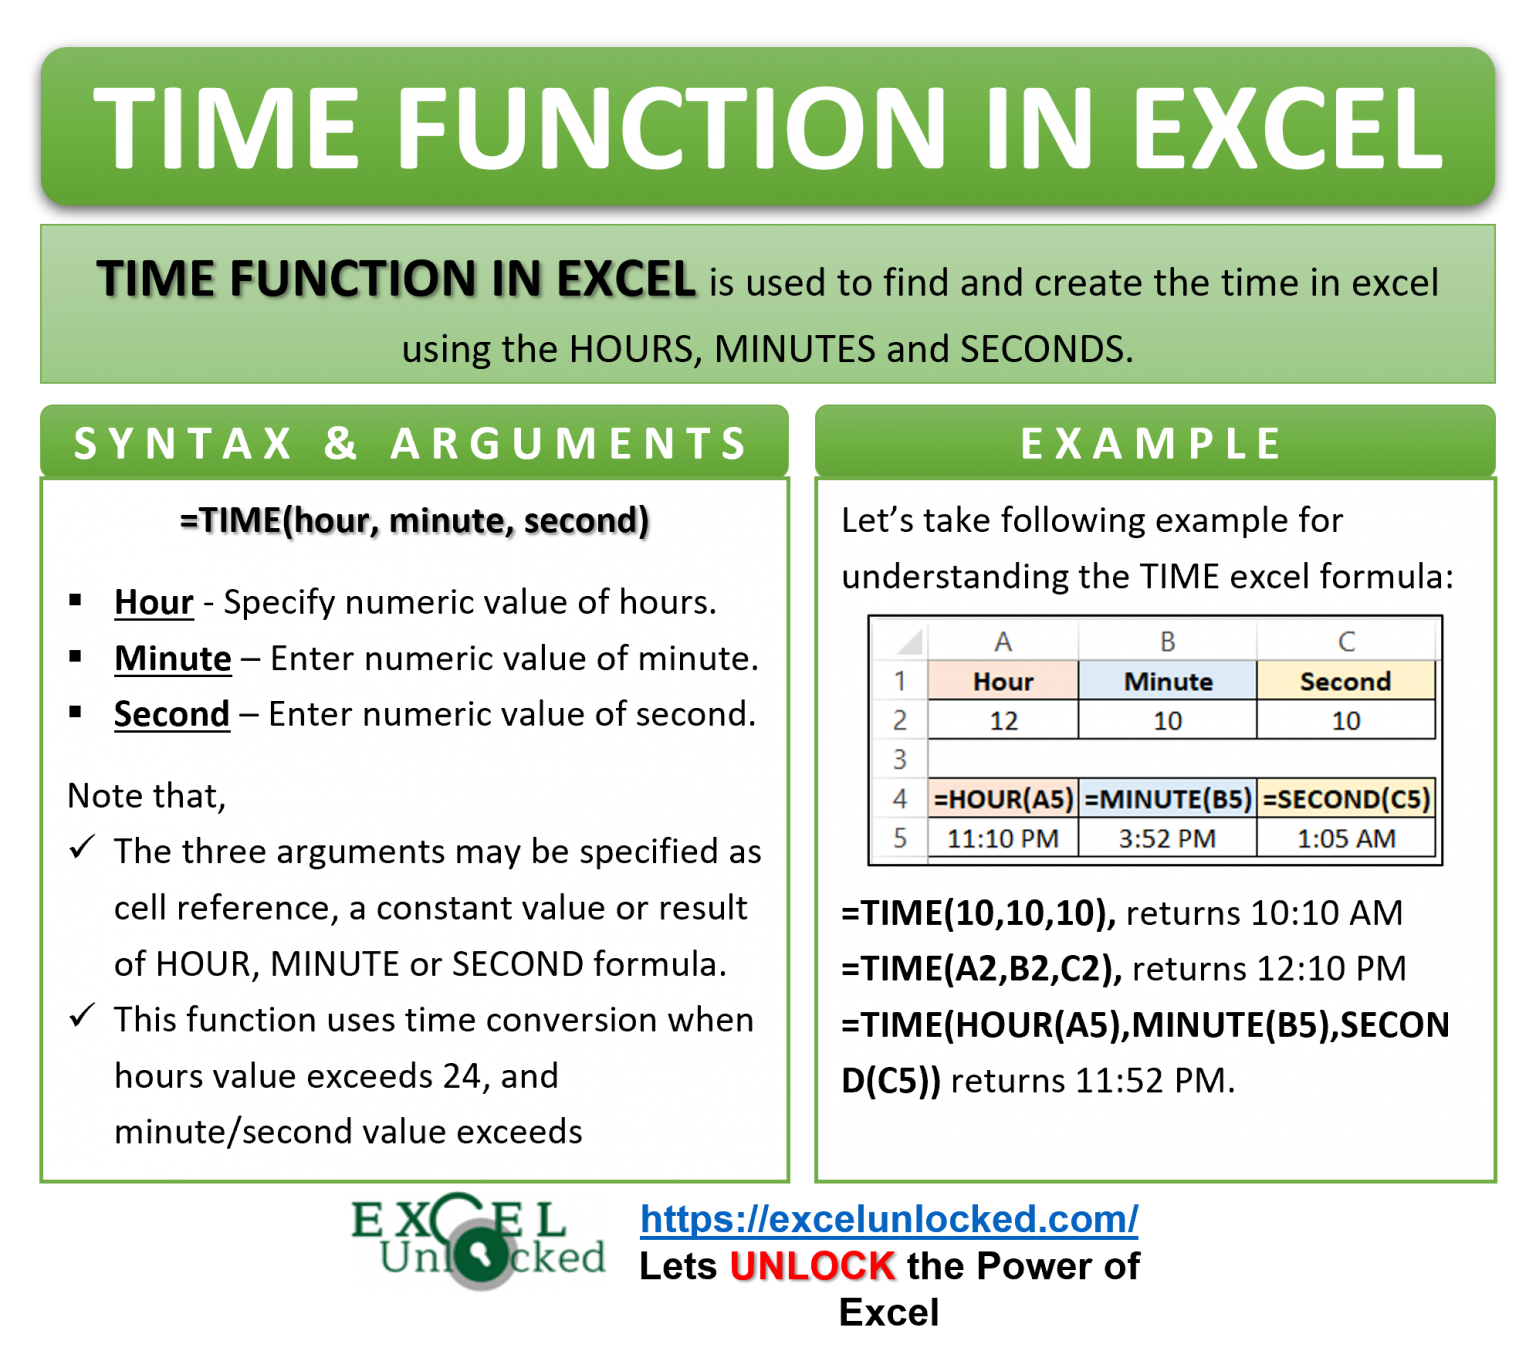 time-function-in-excel-returning-the-time-format-excel-unlocked